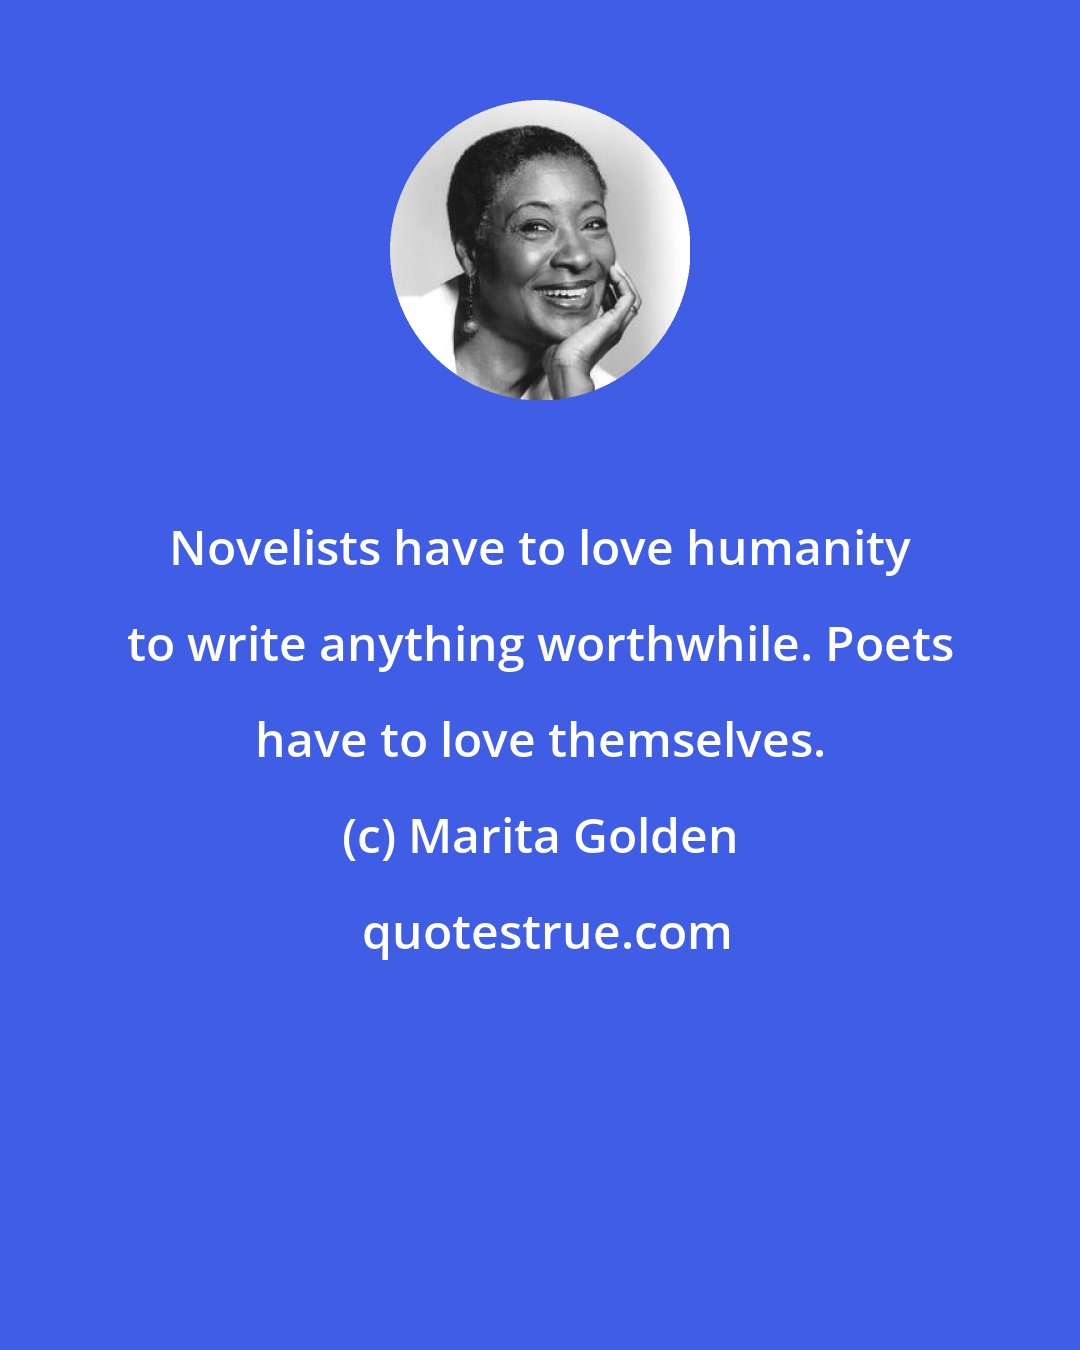 Marita Golden: Novelists have to love humanity to write anything worthwhile. Poets have to love themselves.